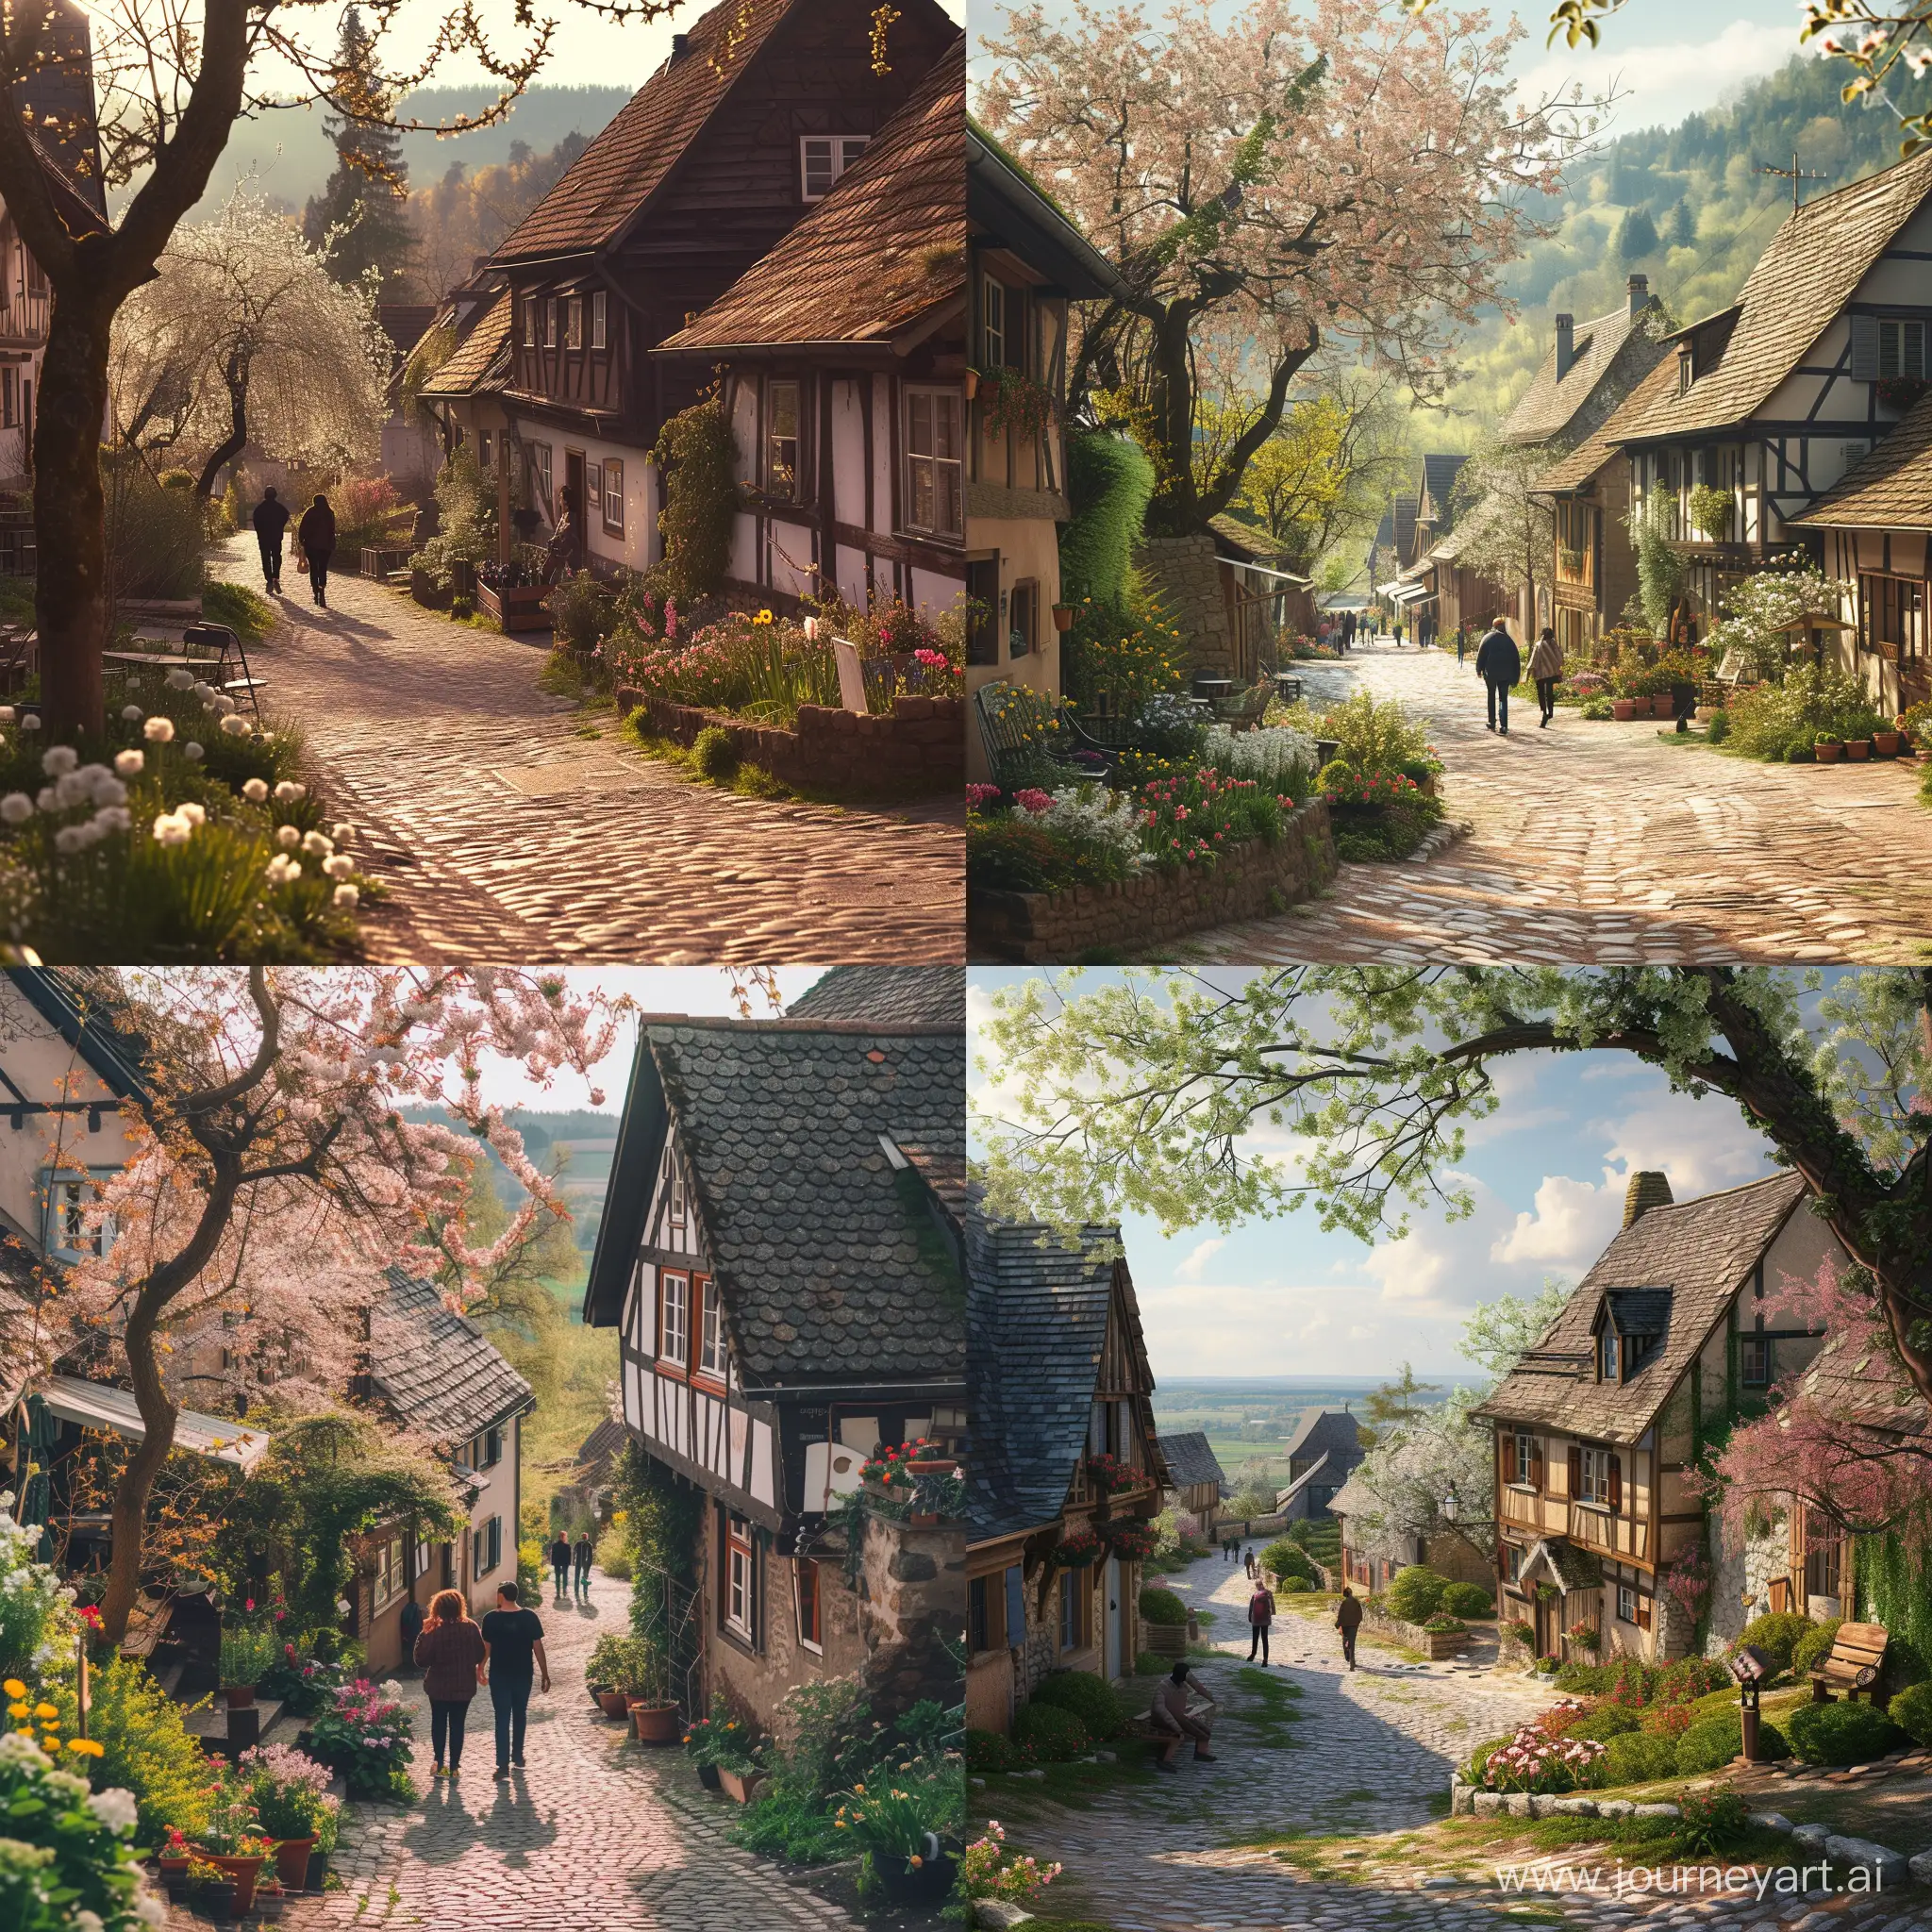 Cozy countryside village during spring break, travelers walking on cobblestone streets, blooming gardens, quaint houses. Created Using: rural charm, spring bloom, peaceful village life, cinematic countryside view, hd quality, natural look